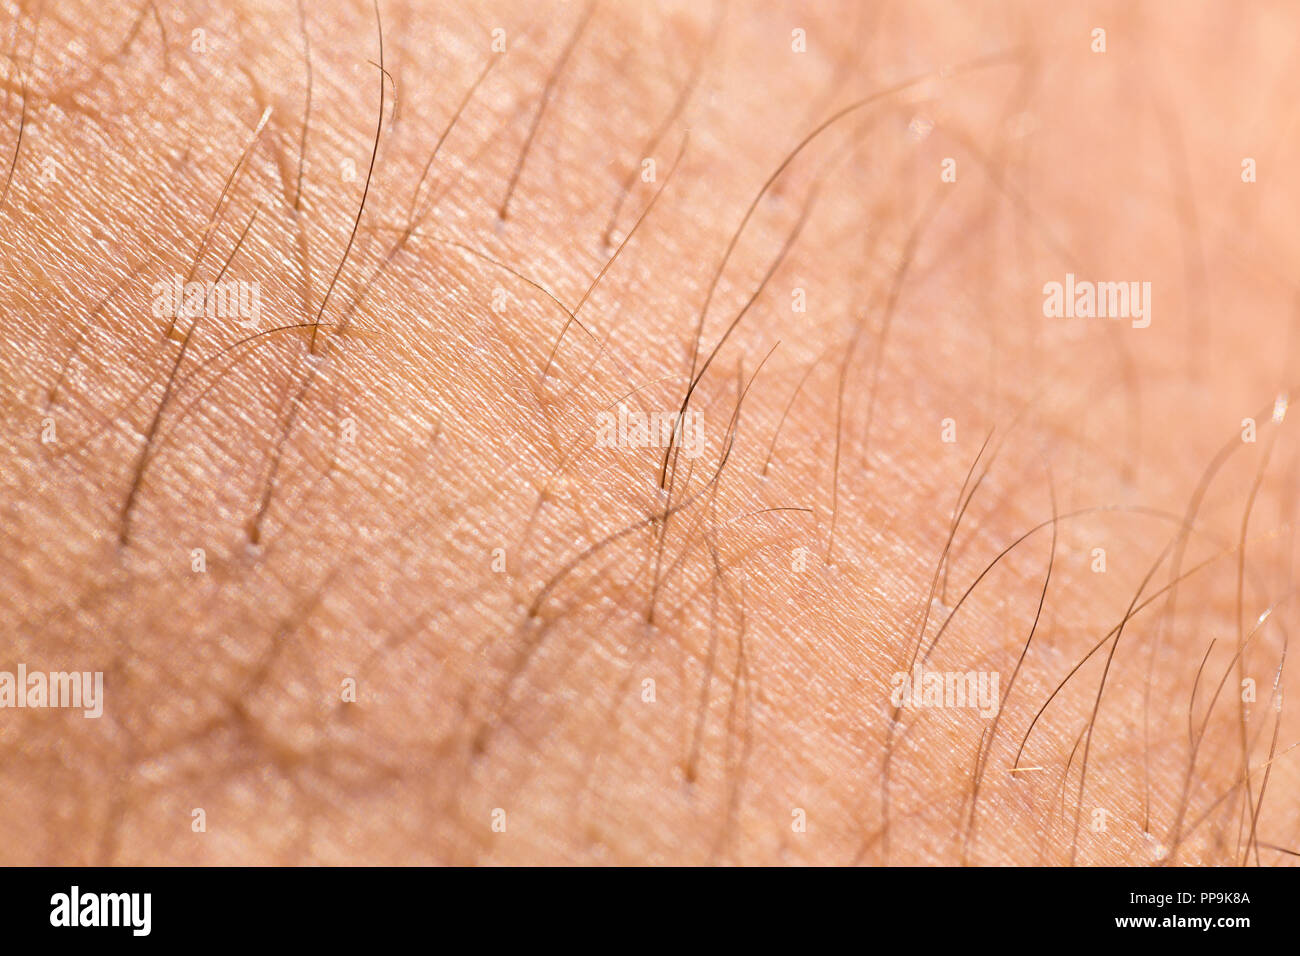 detail of human skin with hair, close-up Stock Photo